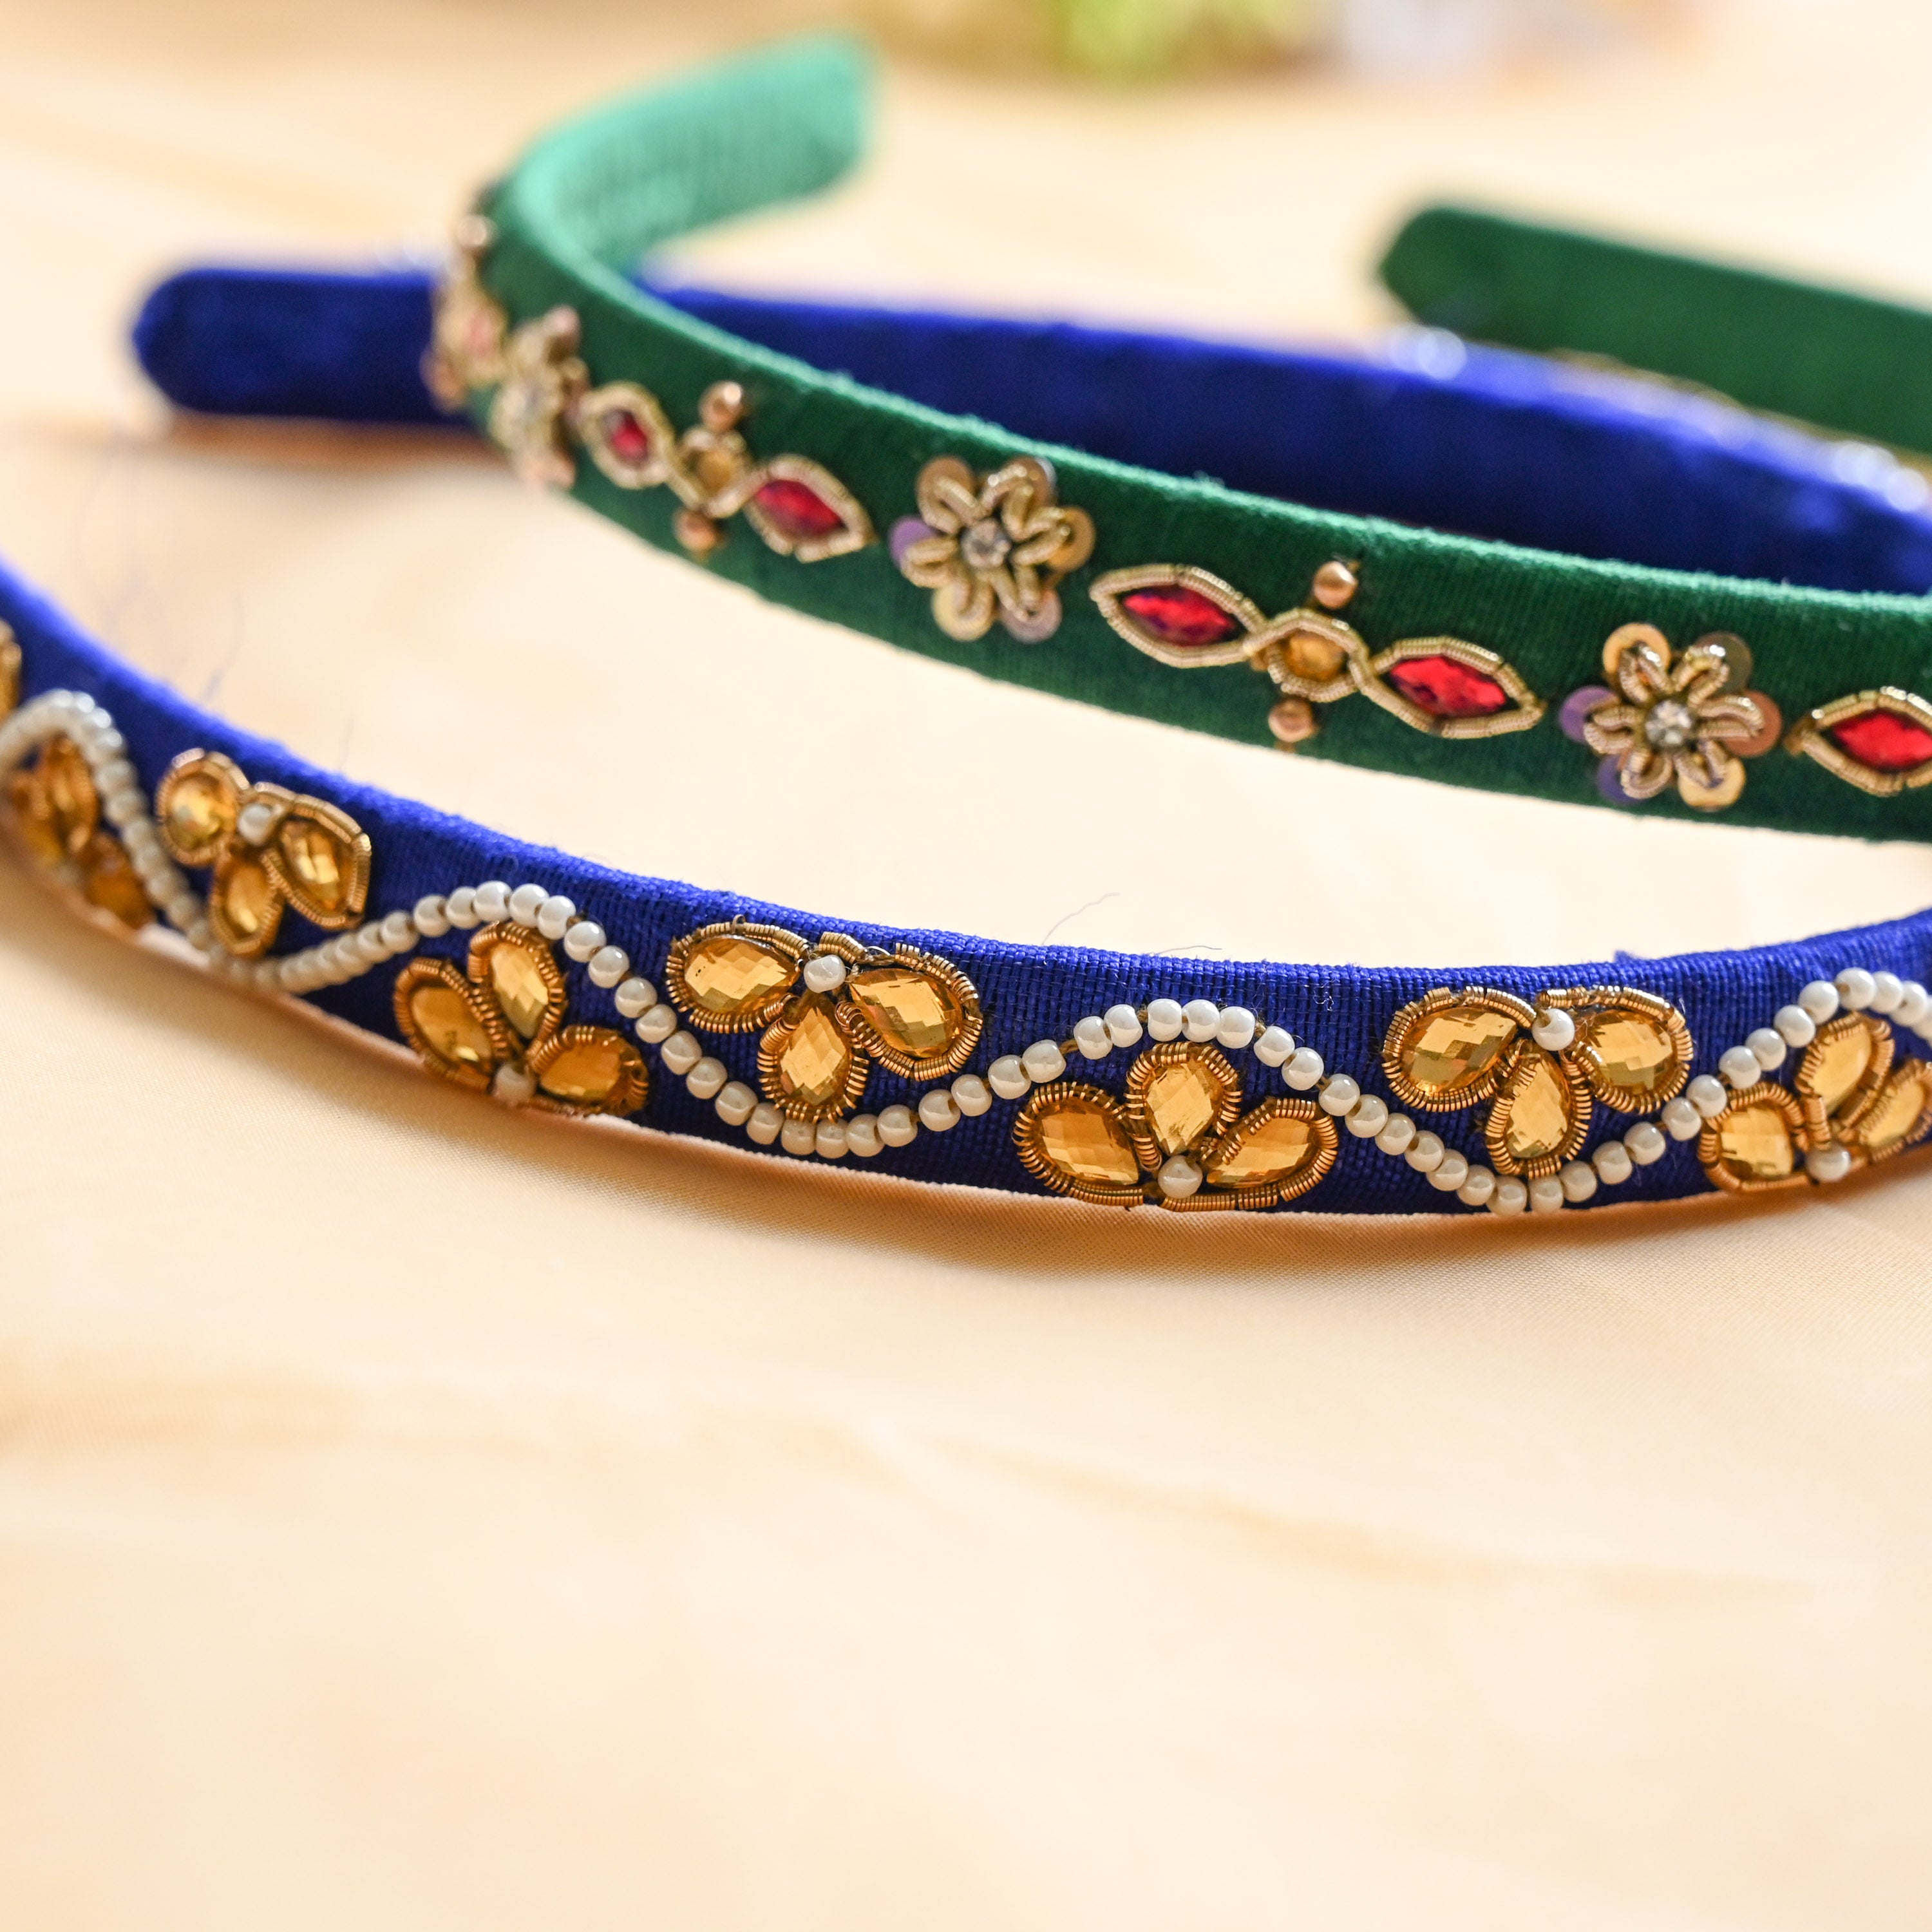 Embroidered Headbands for Girls